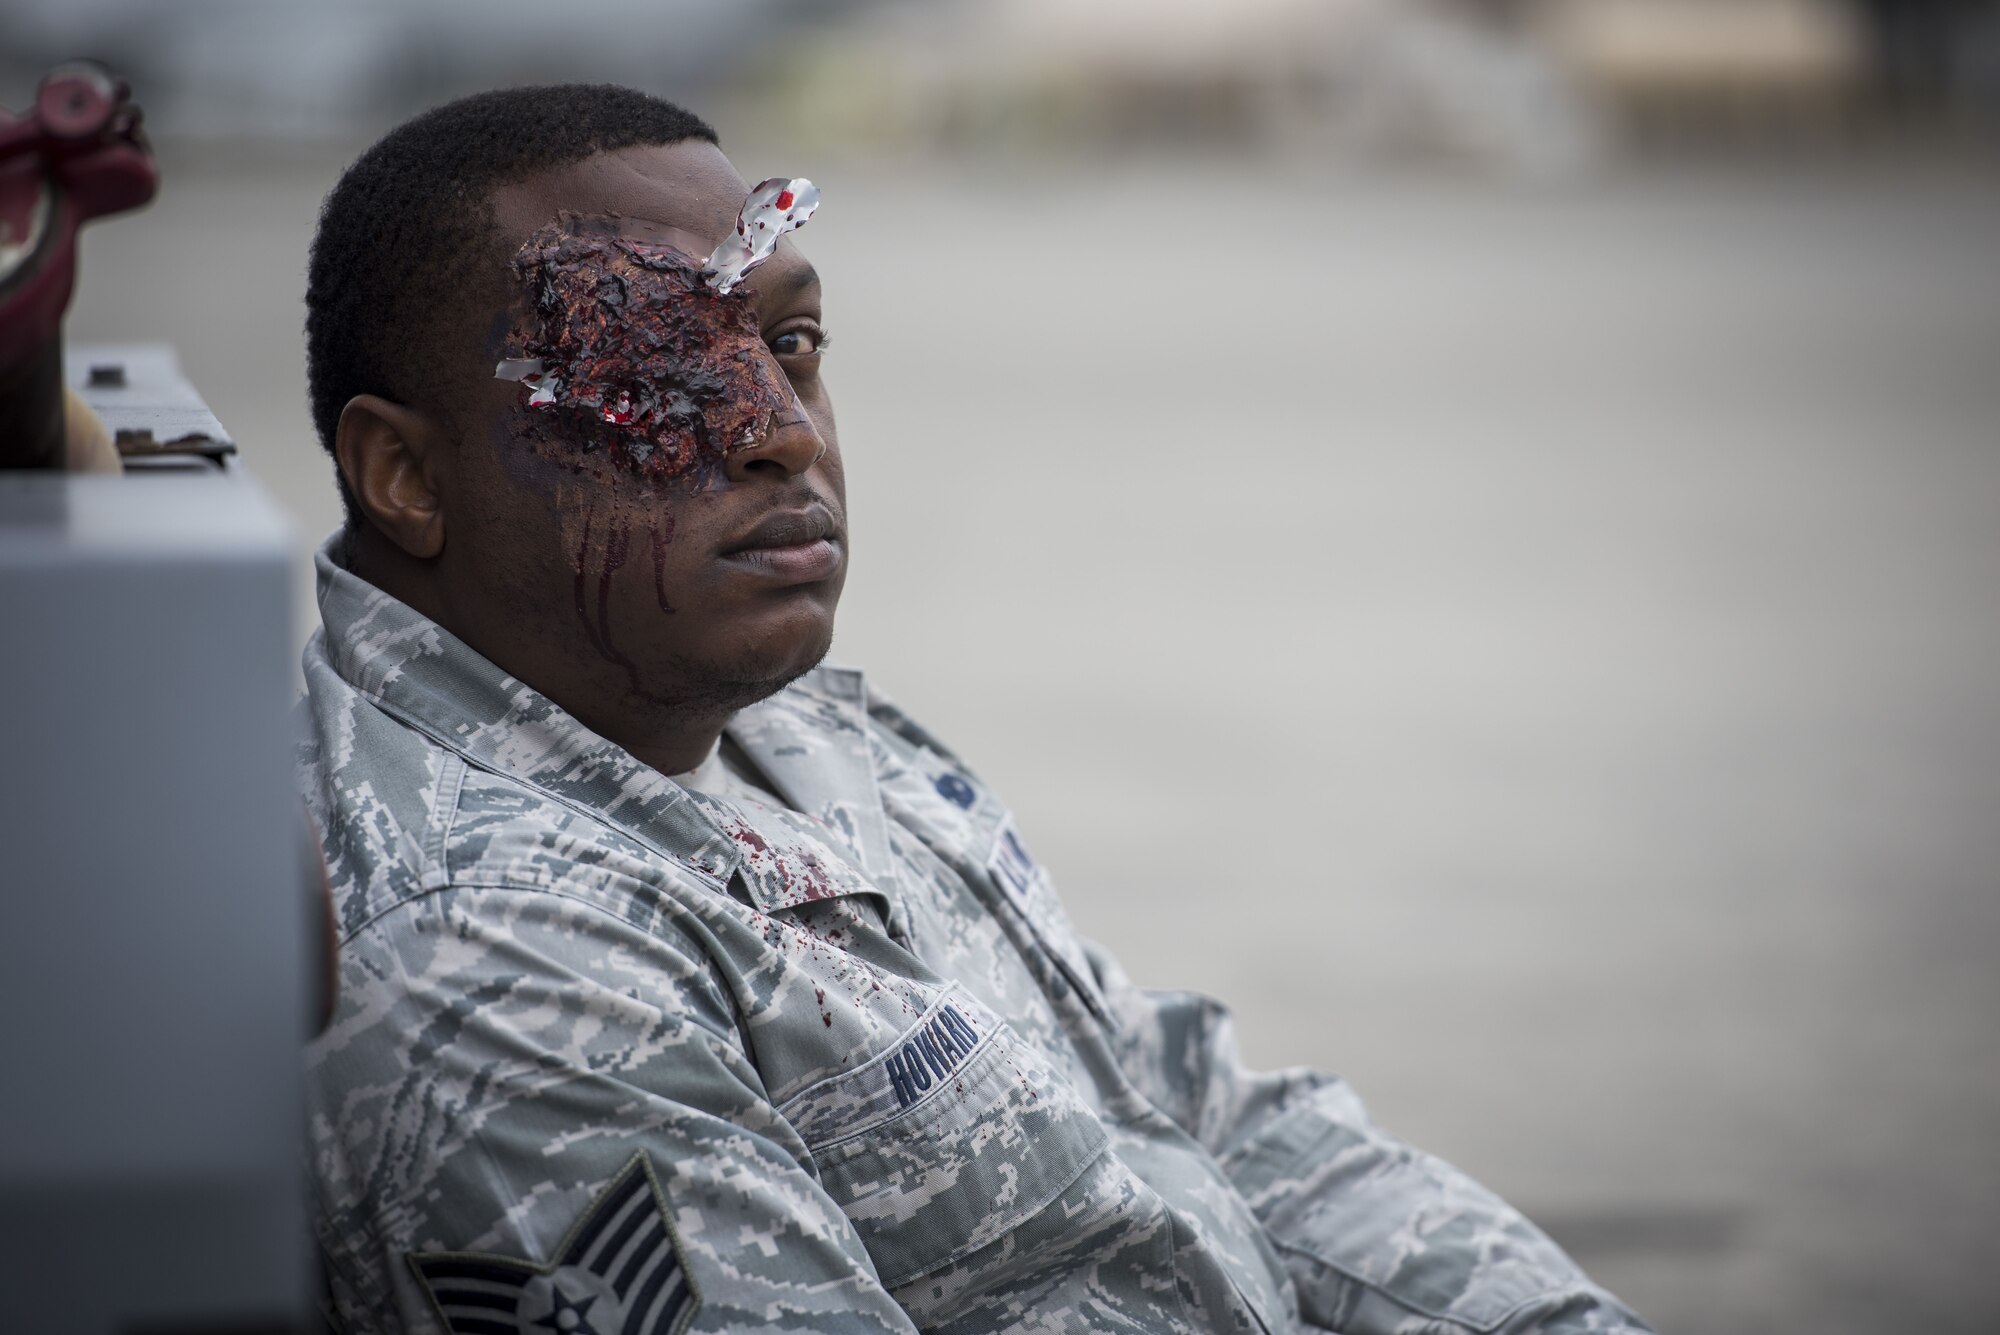 A simulated injured service member waits for emergency response teams during exercise Beverly Morning 17-08 in conjunction with exercise Vigilant Ace 18, Dec. 4, 2017, at Yokota Air Base, Japan.